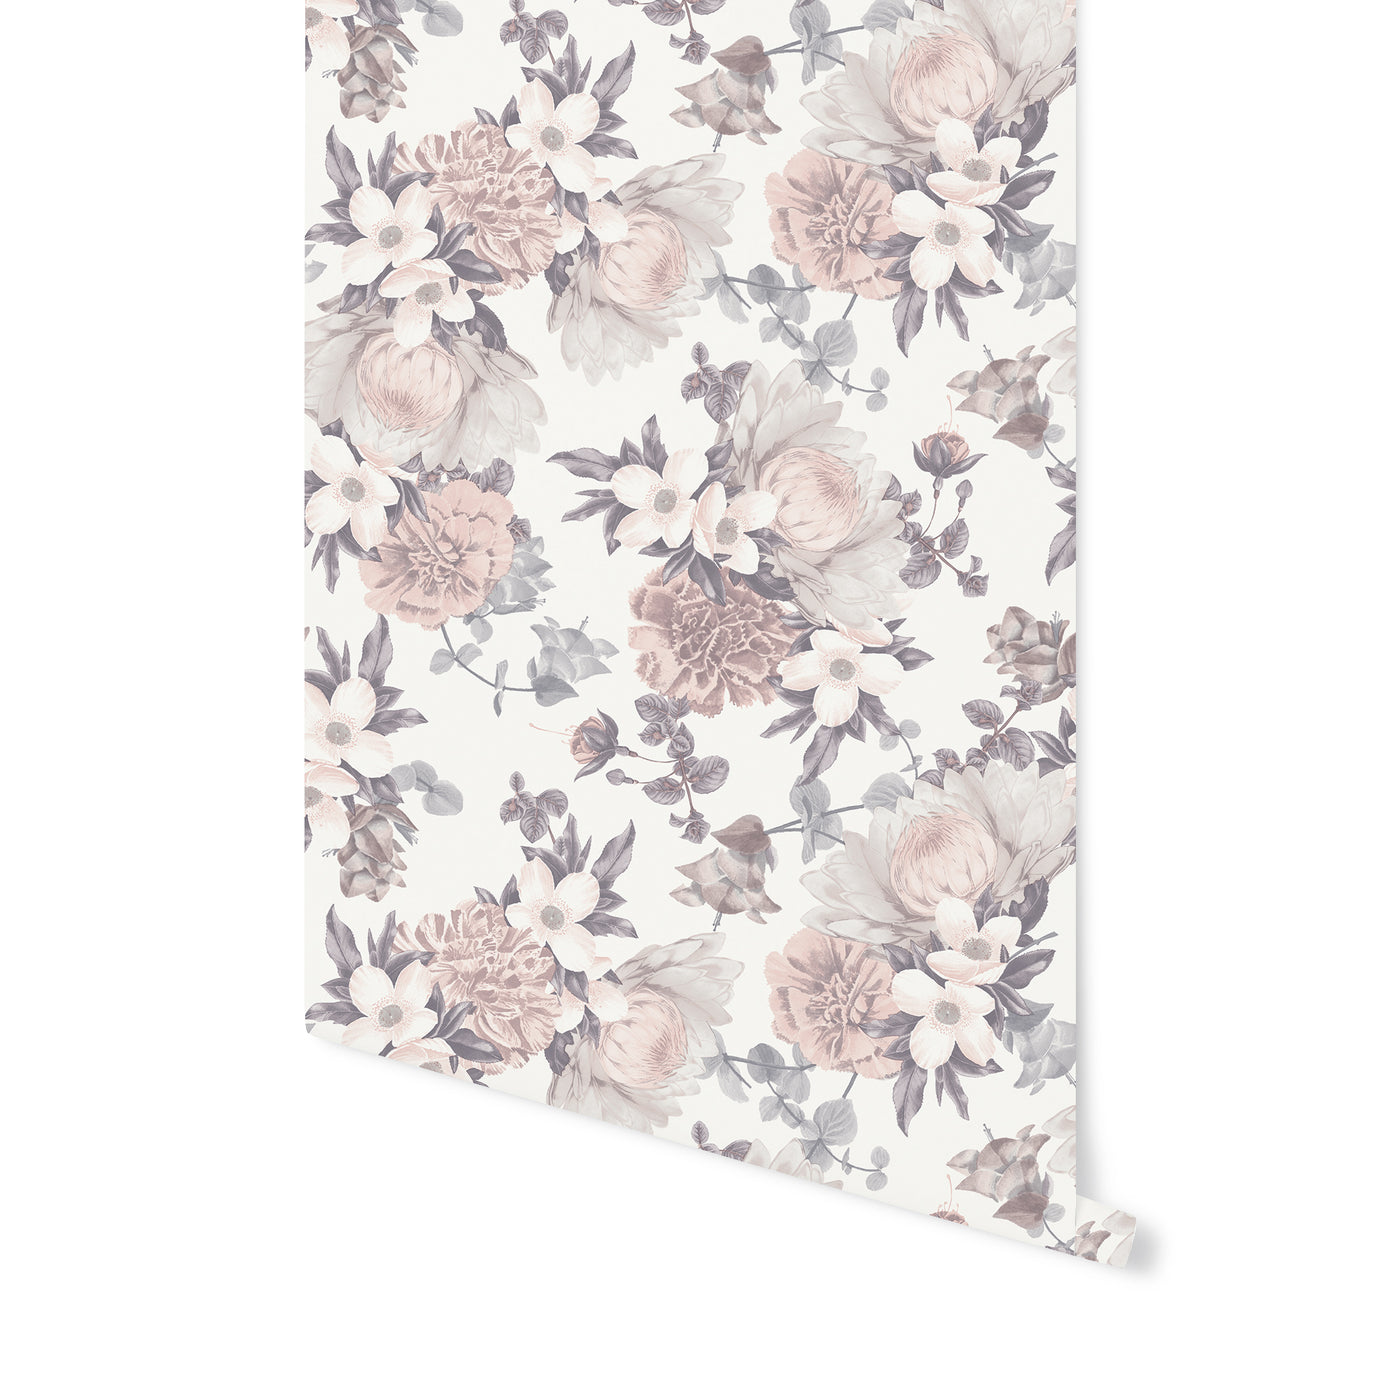 A slightly unraveled roll of Botanical WALLPAPER in mauve pink hanging on a white wall.